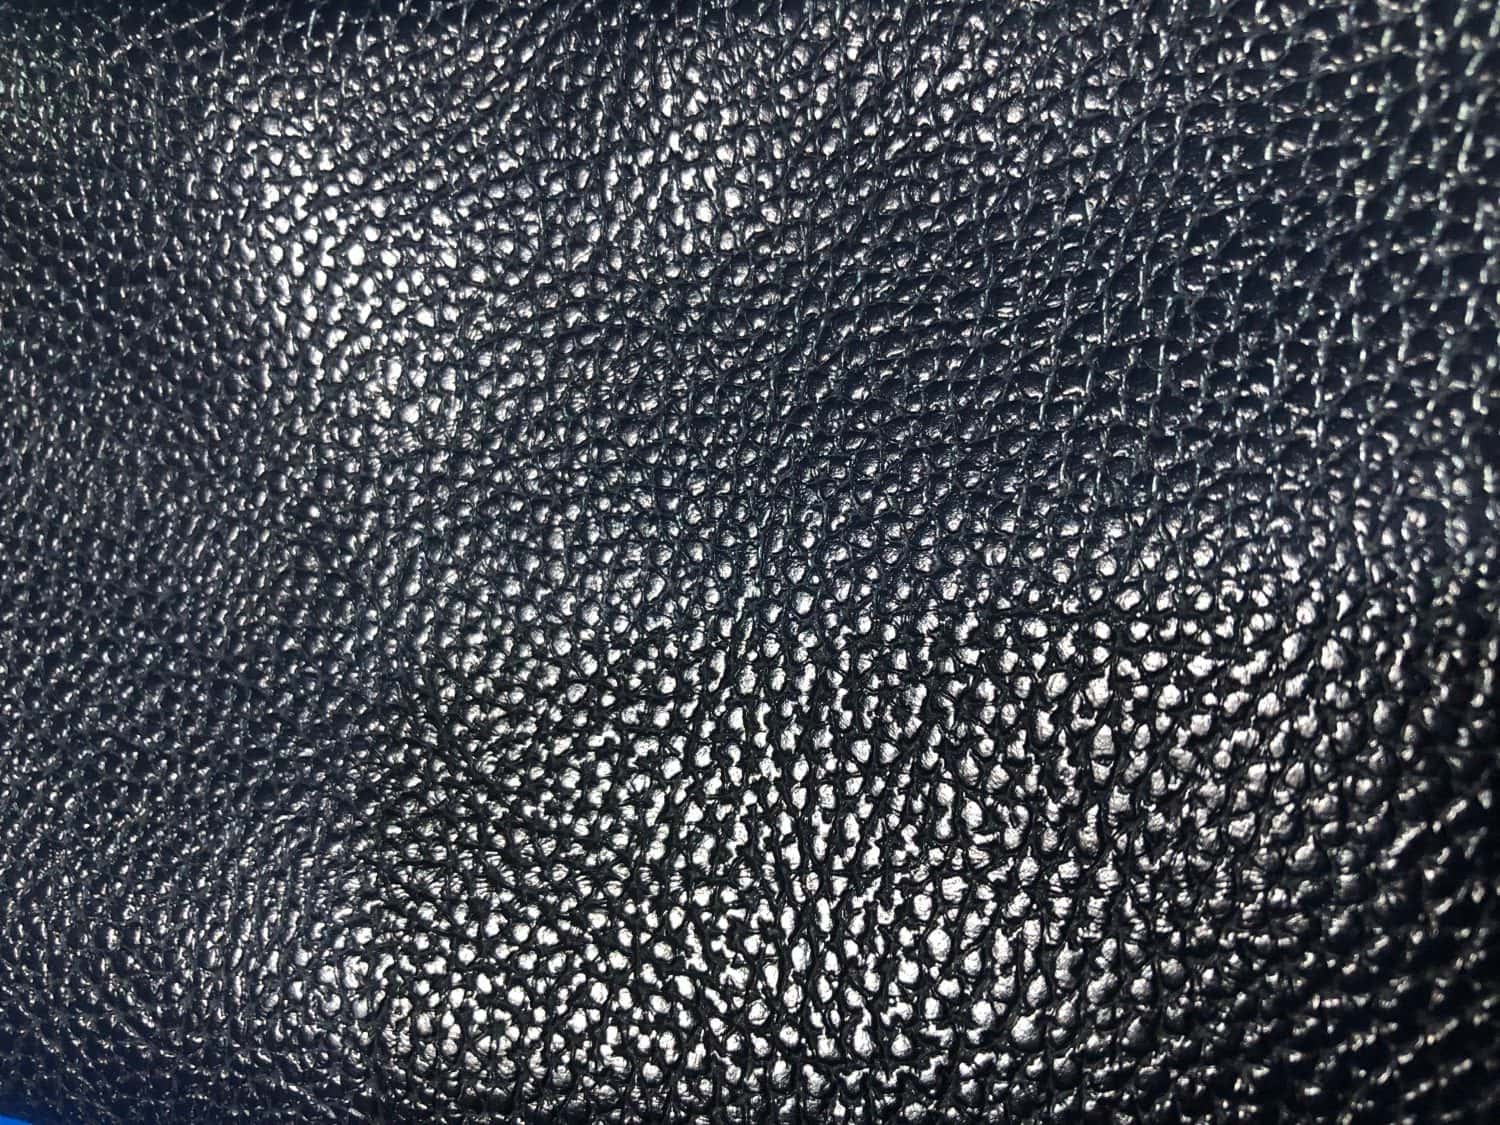 Black PU leather used for making bags in various styles. There are many colors. It has a shiny, rough surface. But it is soft, not hard, and feels like real cowhide to the touch.